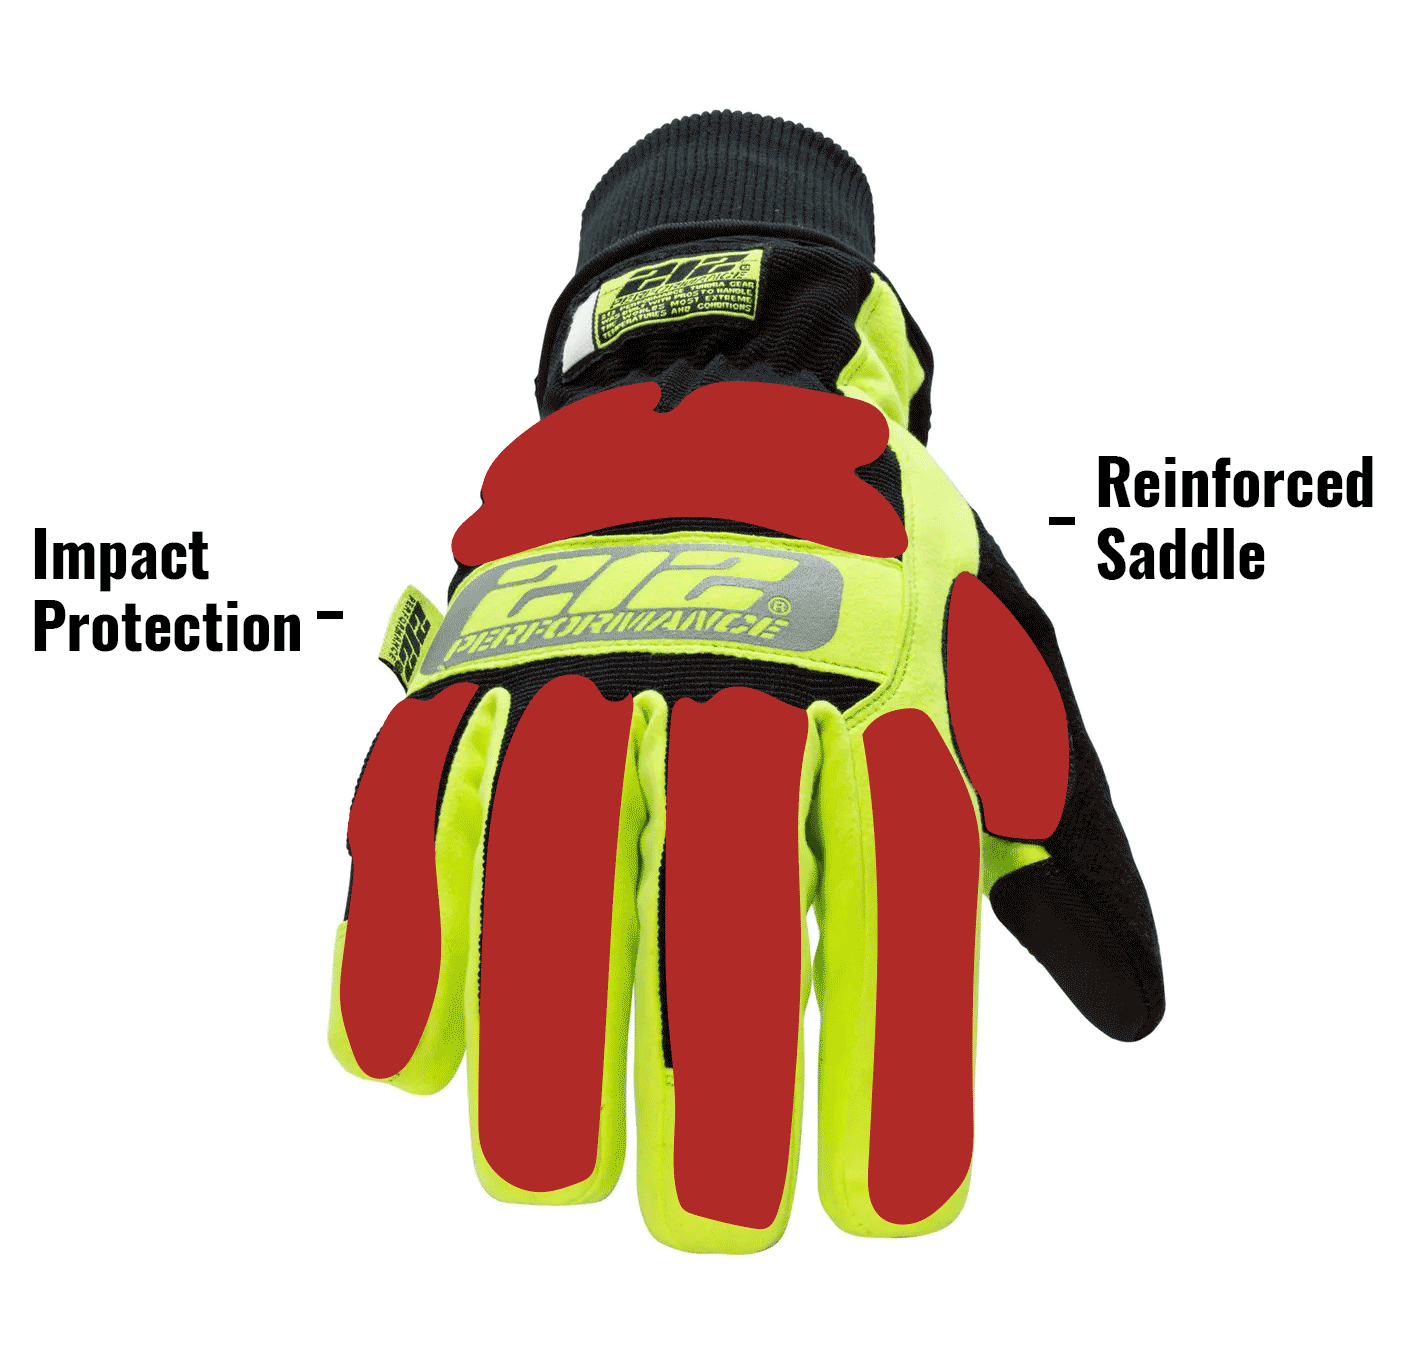 Impact Protection.Reinforced Saddle